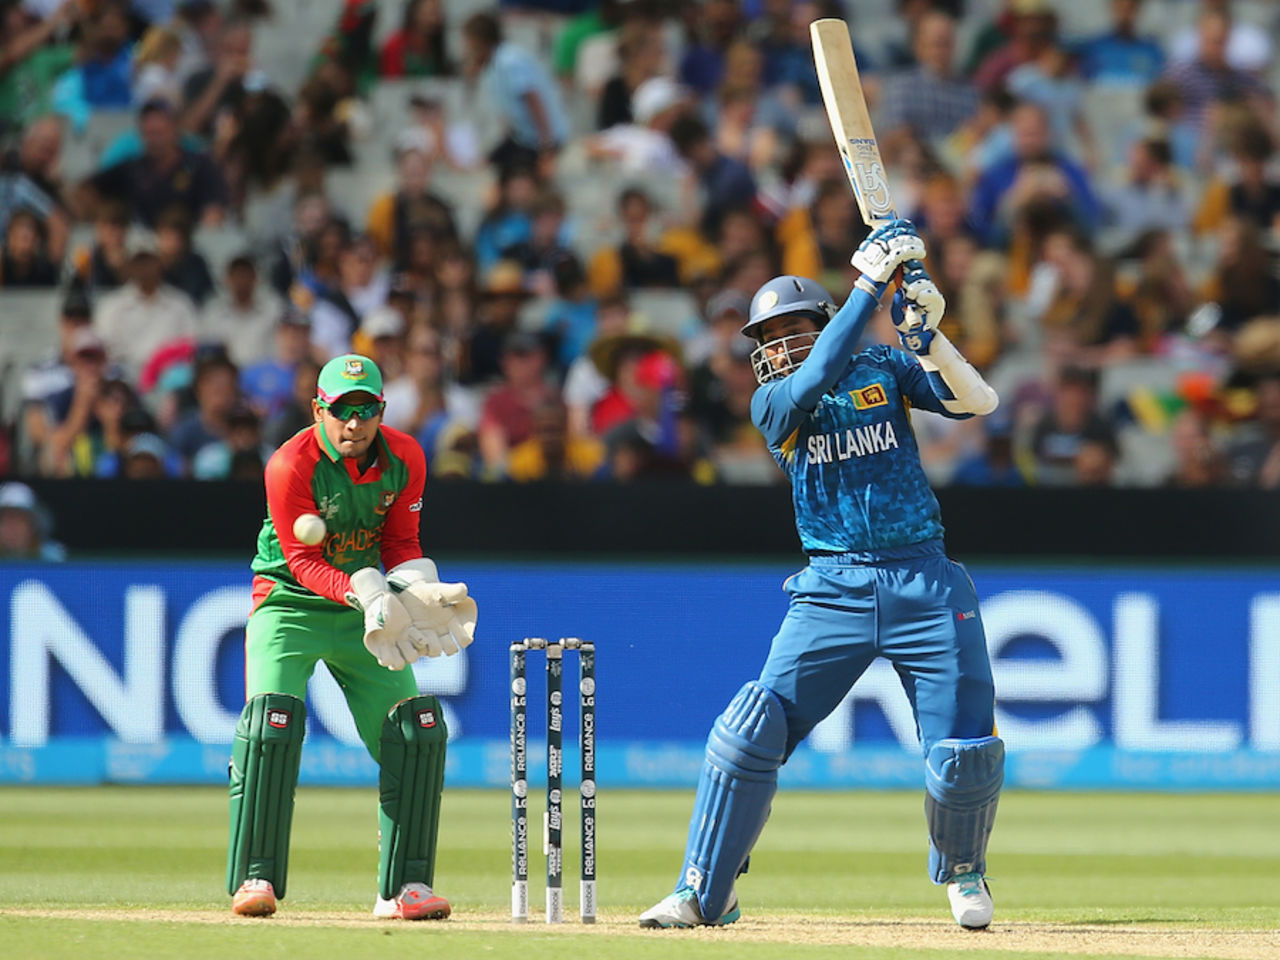 Tillakaratne Dilshan punches the ball on the off side, Bangladesh v Sri Lanka, World Cup 2015, Group A, Melbourne, February 26, 2015